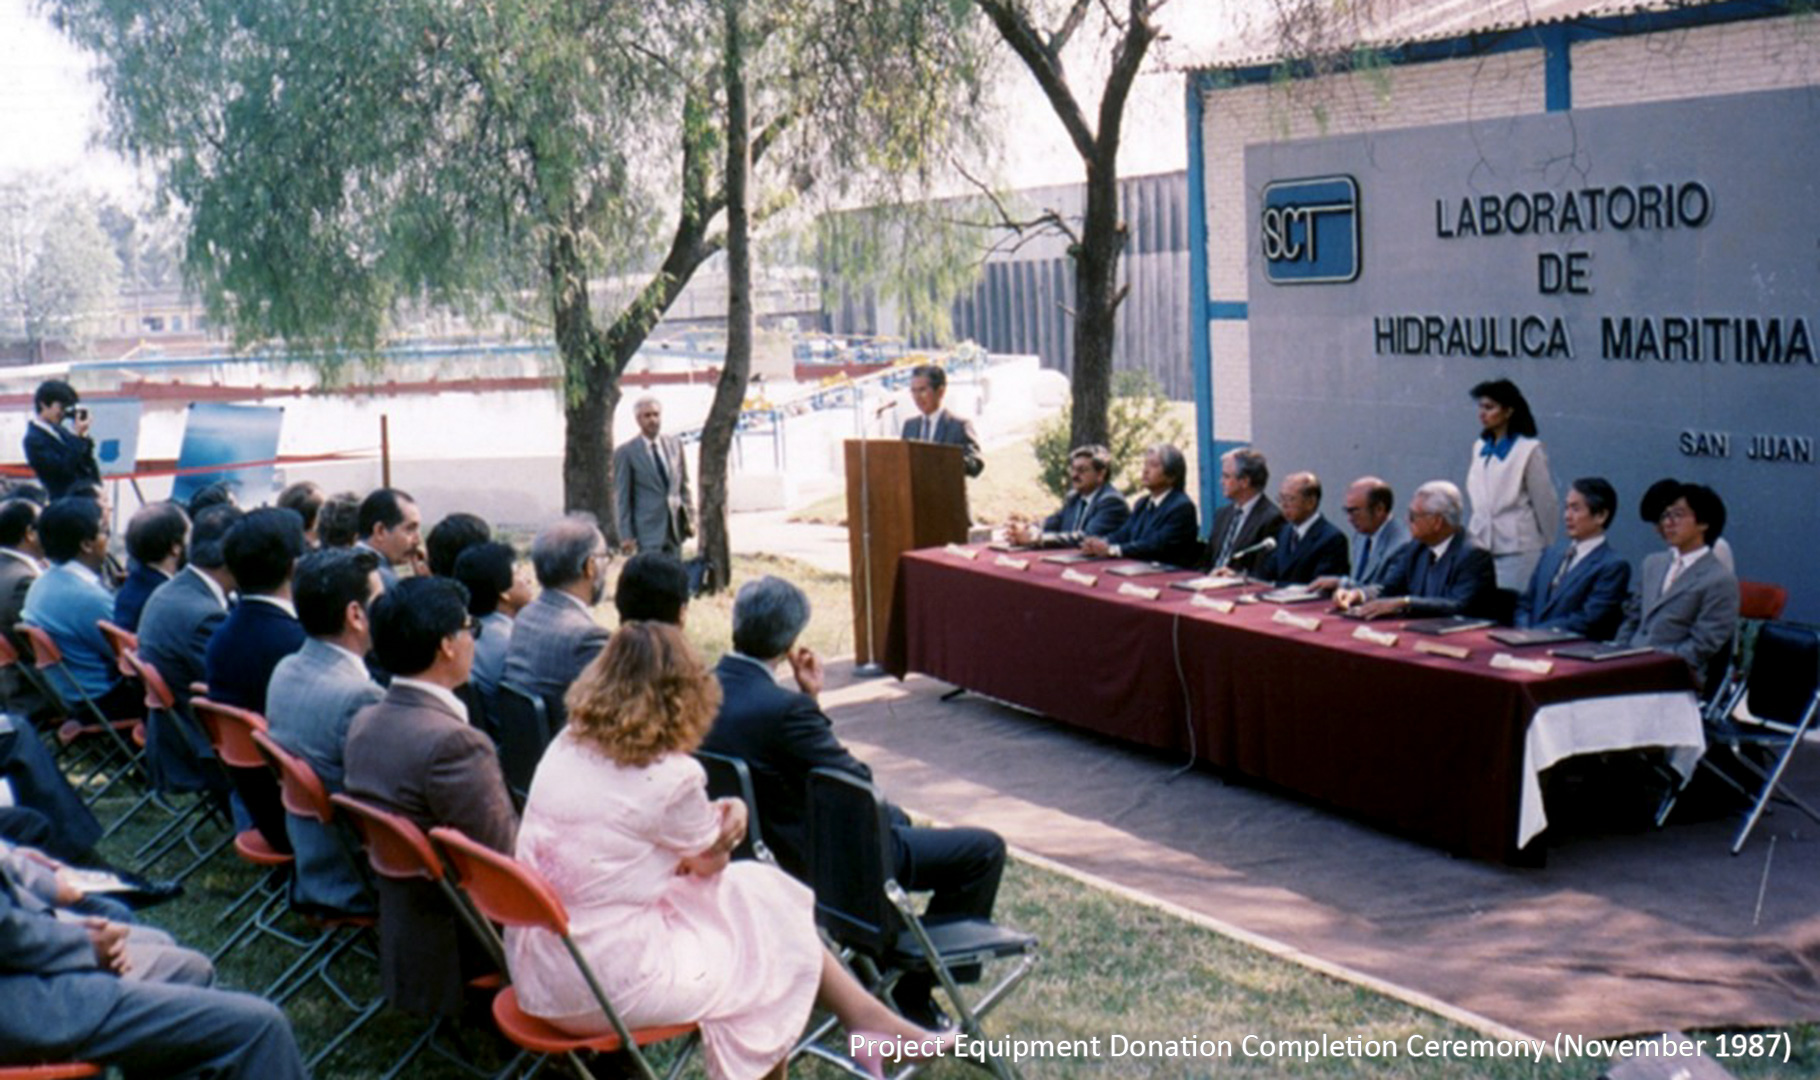 Round-Pacific Japan-Mexico Port Hydraulic Research Network Starting with Mexico Port Hydraulic Center Project